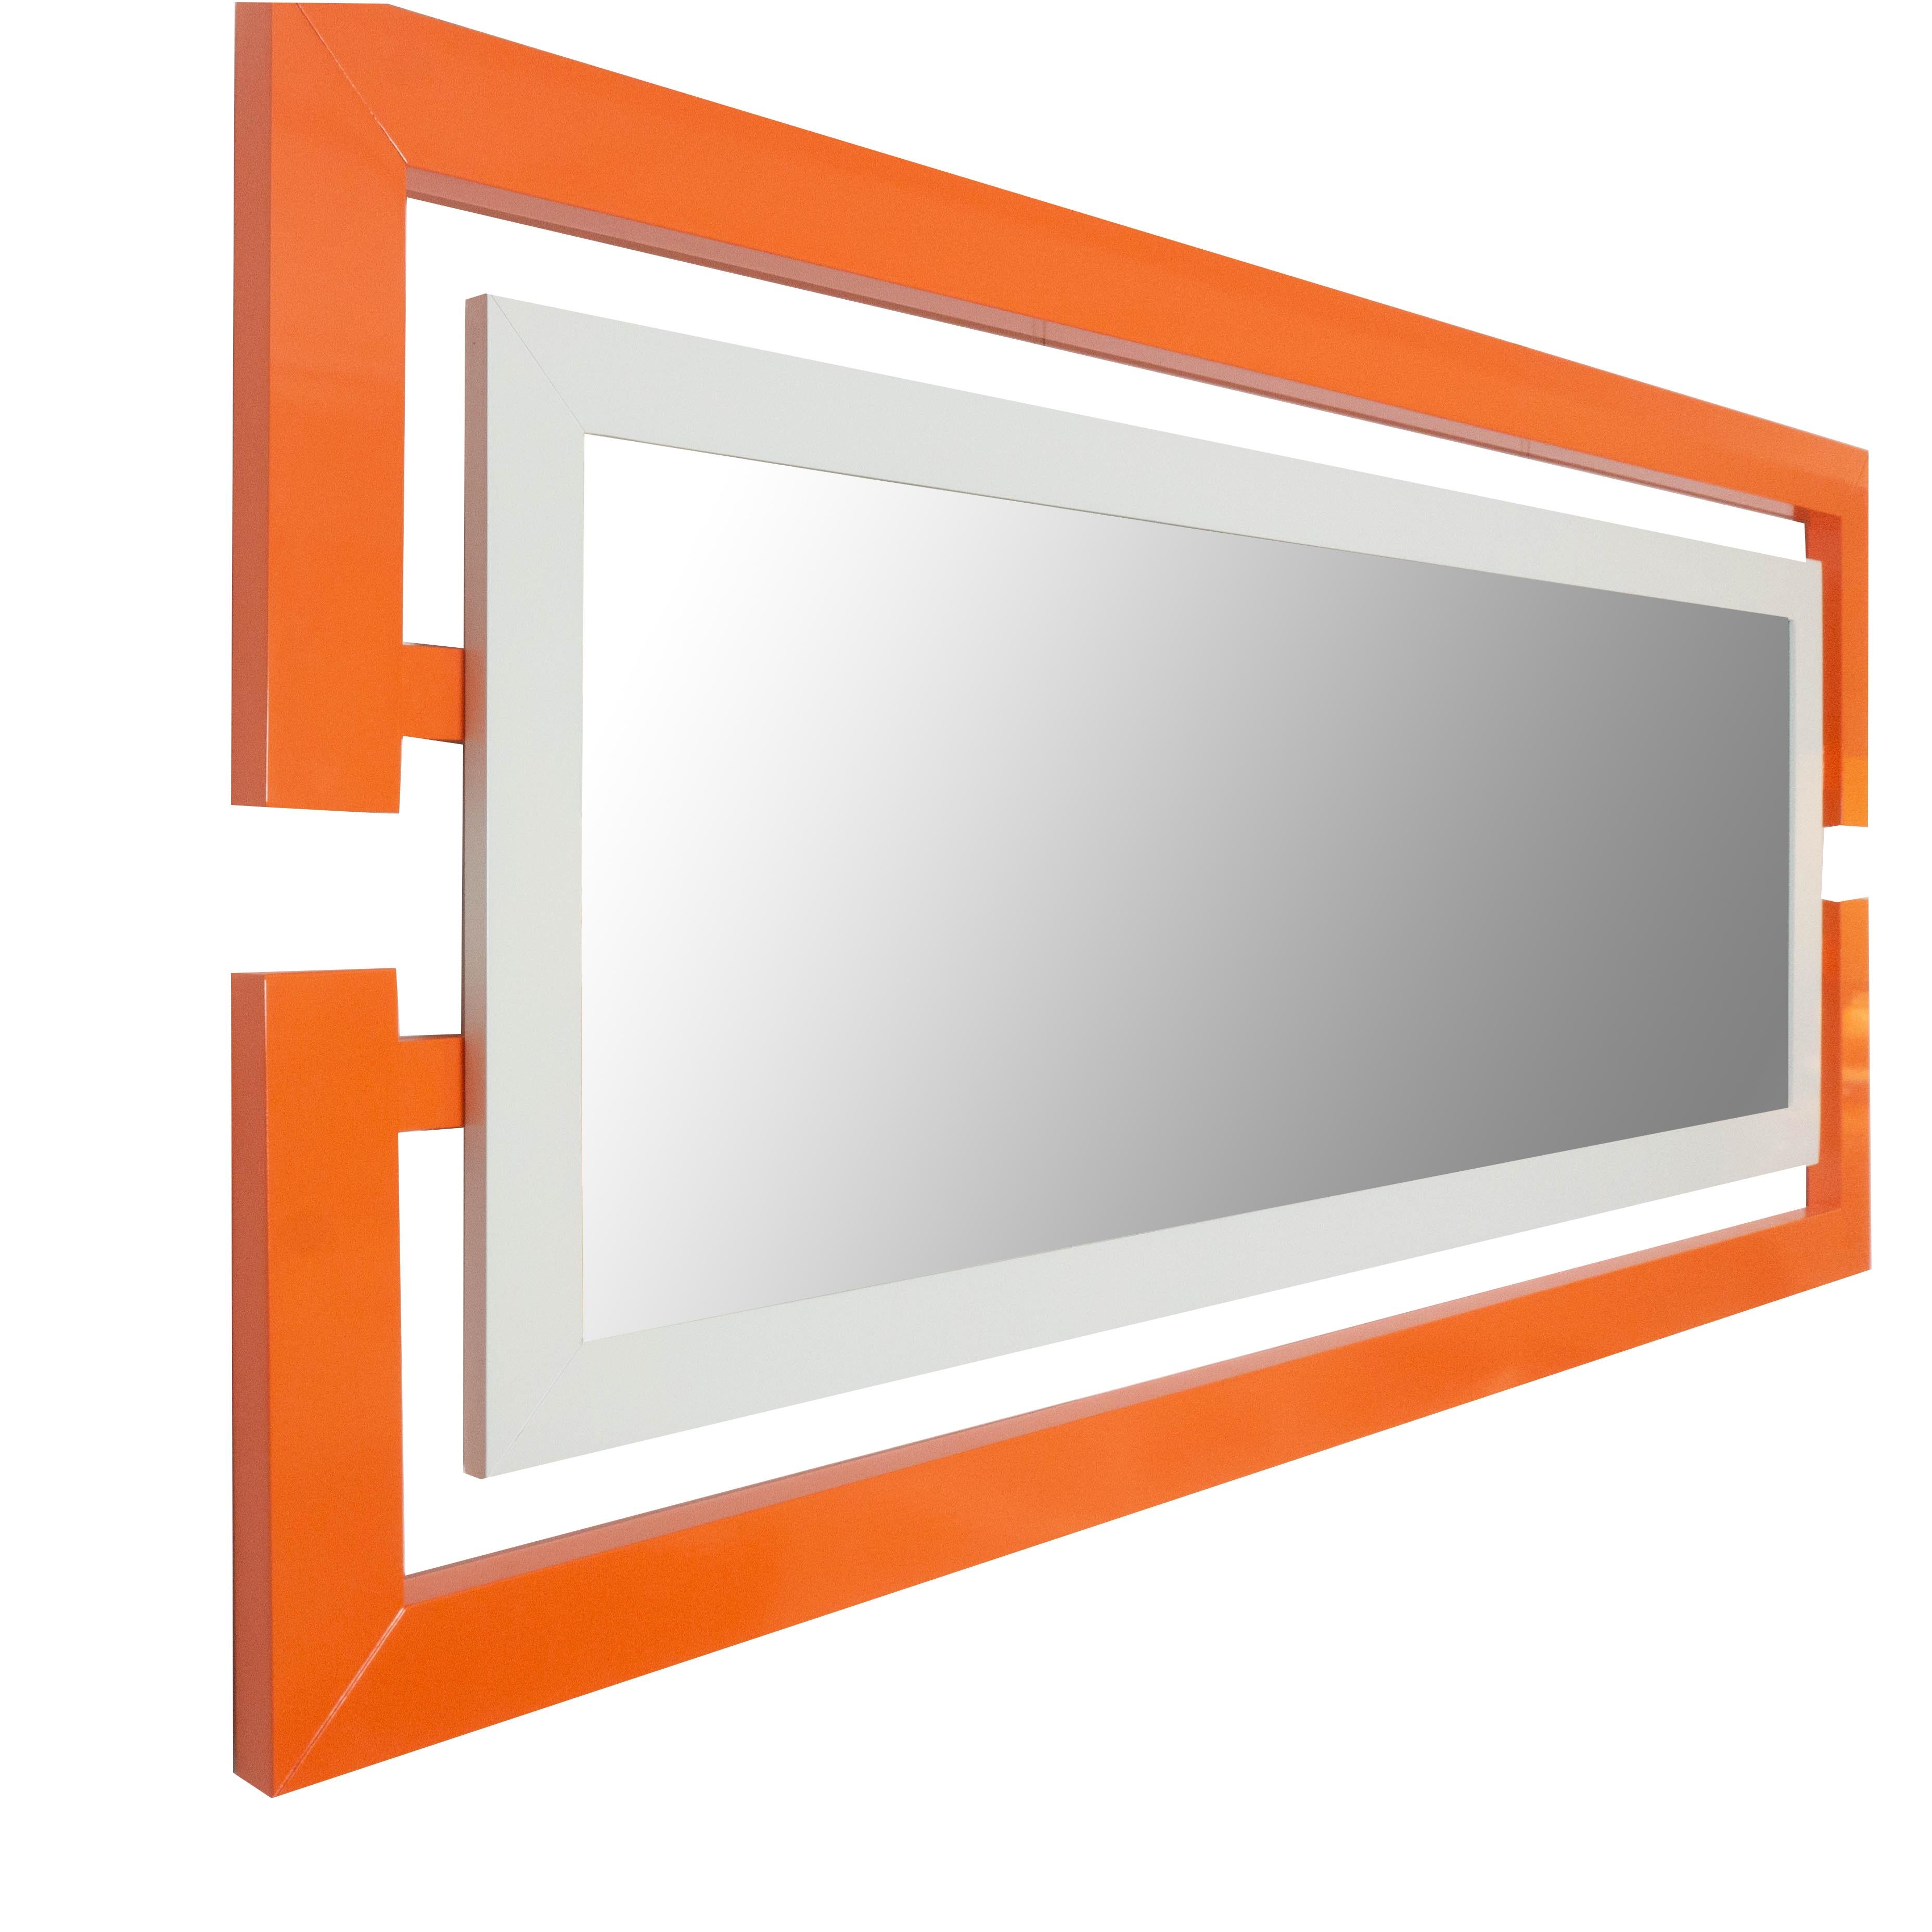 Inspired by the Space Age, this modern rectangle wall mirror lacquered in a matte orange can be bought as shown or customized to your liking. Handcrafted in our studio in Norwalk, Connecticut. 

Measurements: 34